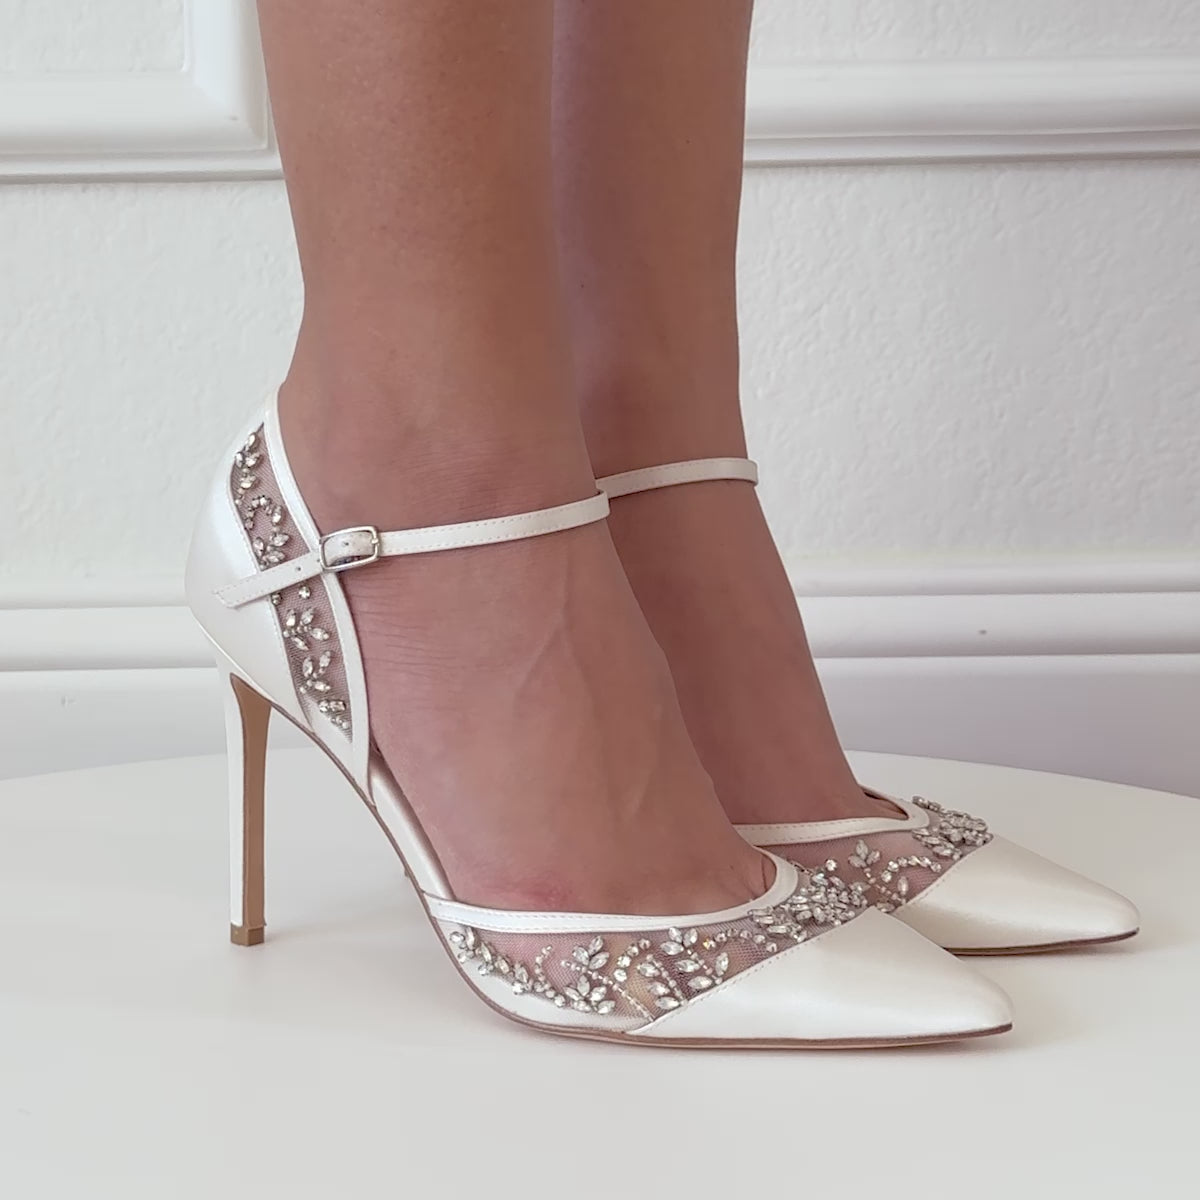 40 Wedding Shoes That Are Worthy of an Instagram